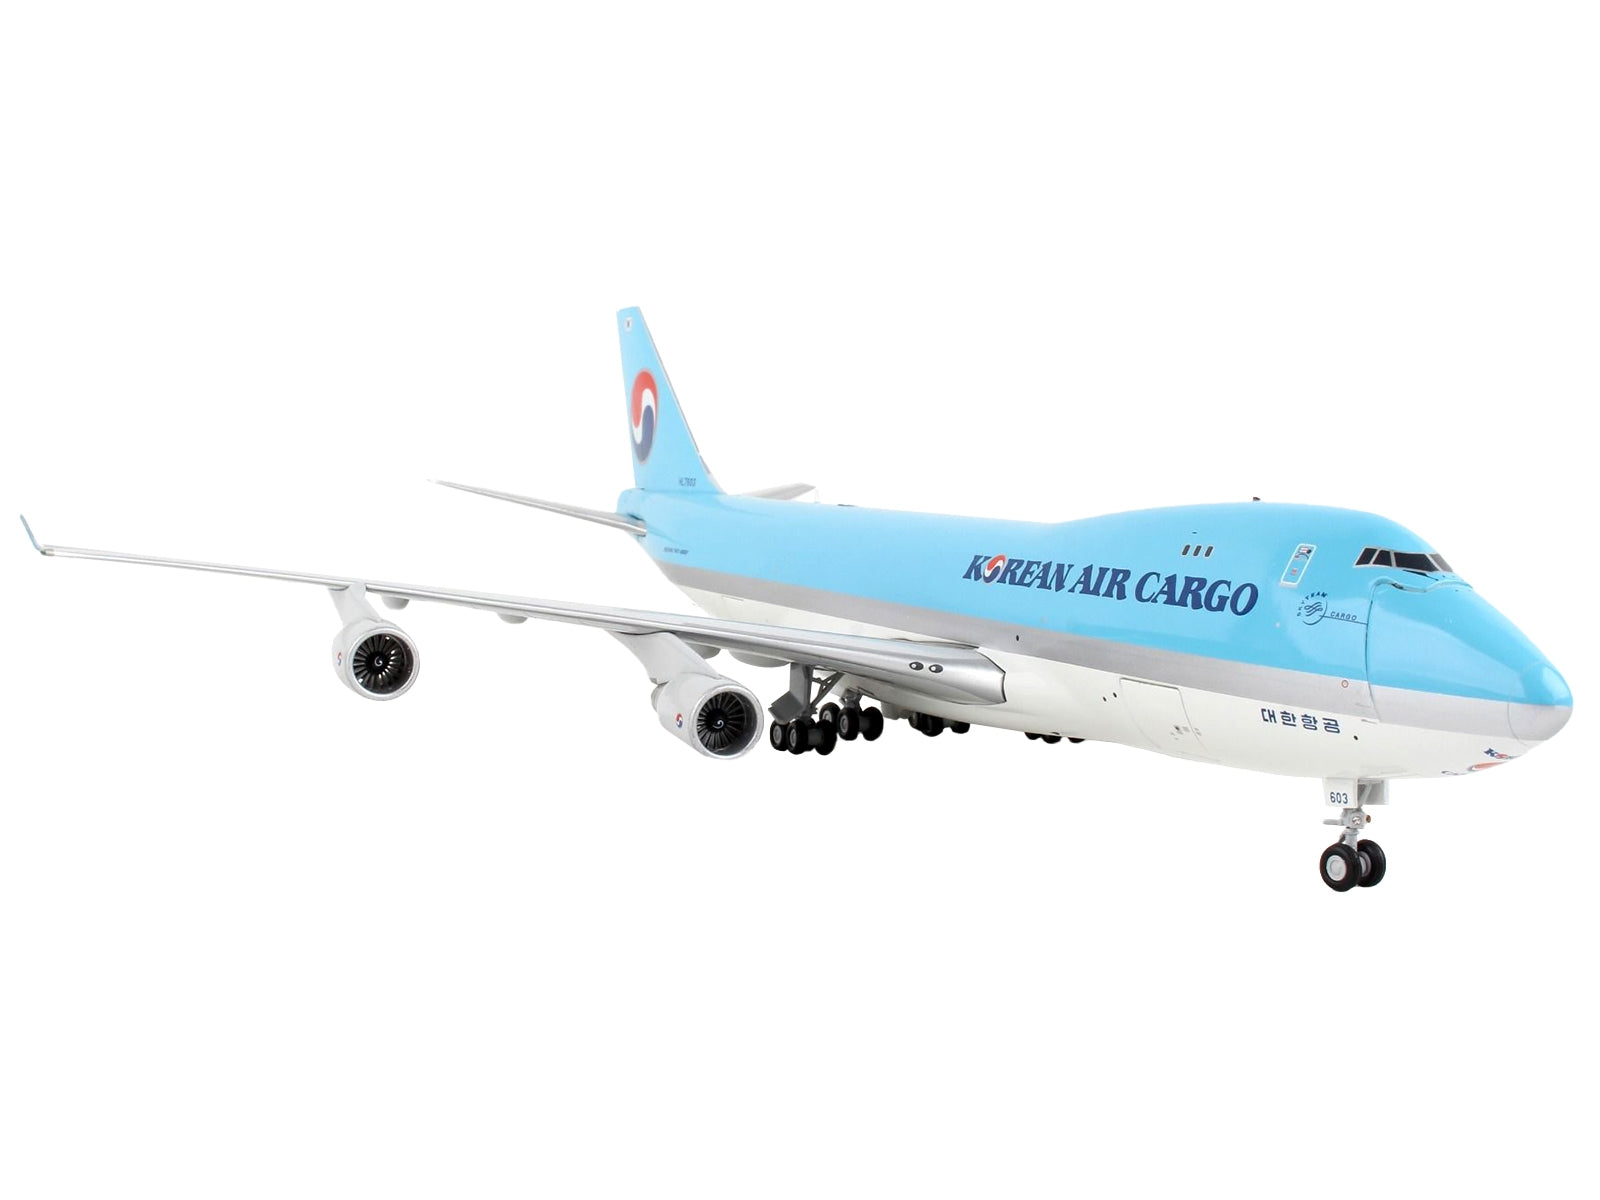 Boeing 747-400F Commercial Aircraft "Korean Air Cargo" Light Blue "Gemini 200 - Interactive" Series 1/200 Diecast Model Airplane by GeminiJets